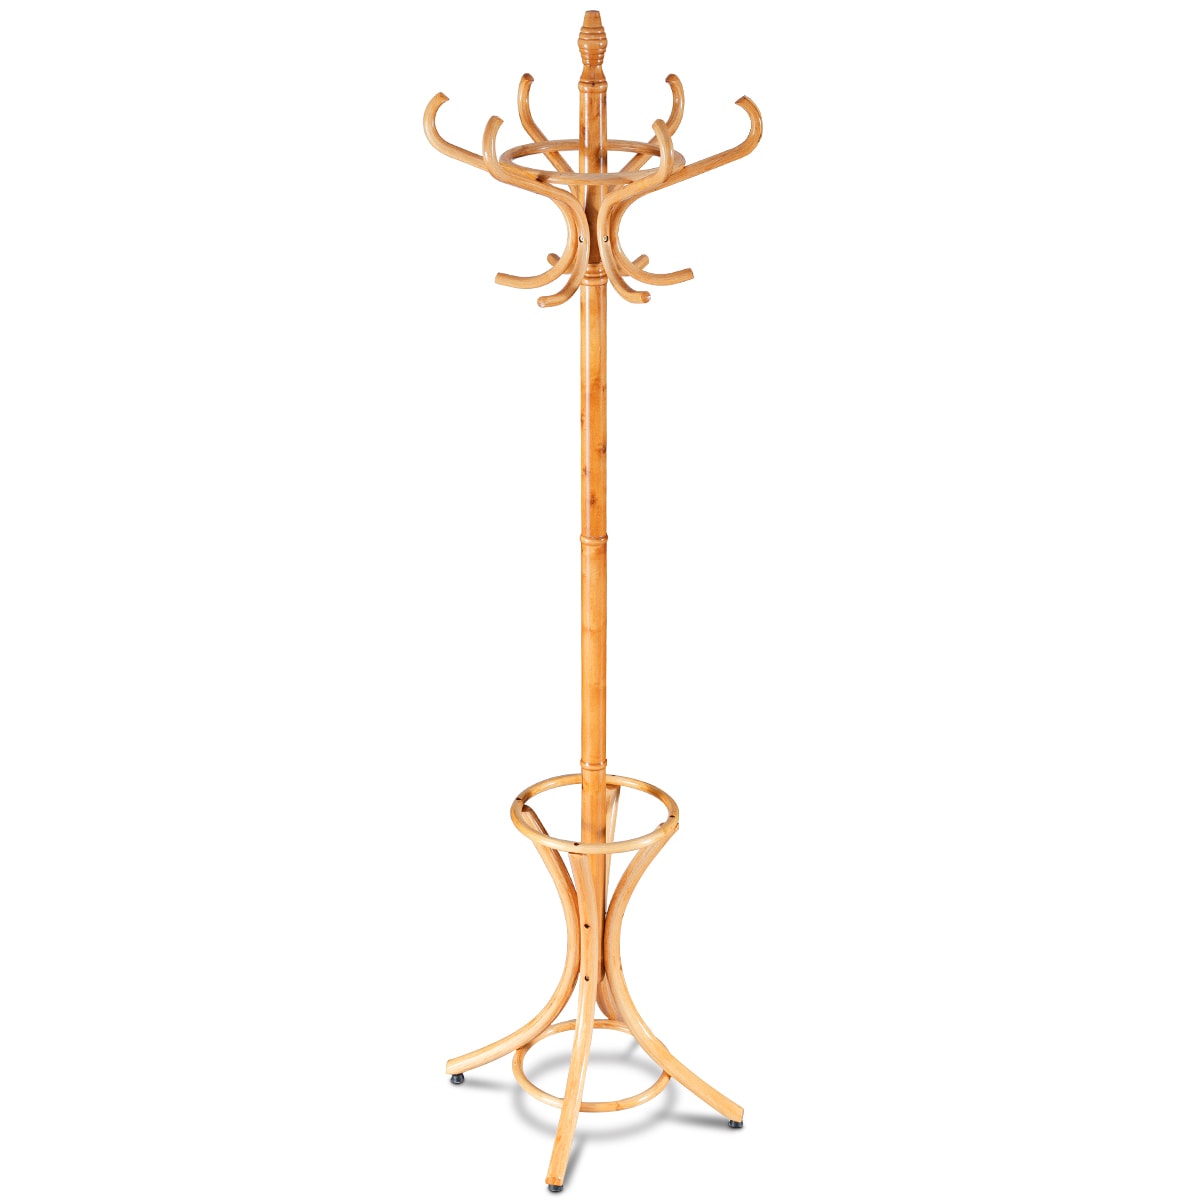 Oak Details about   Frenchi Home Furnishing Traditional Coat Rack 